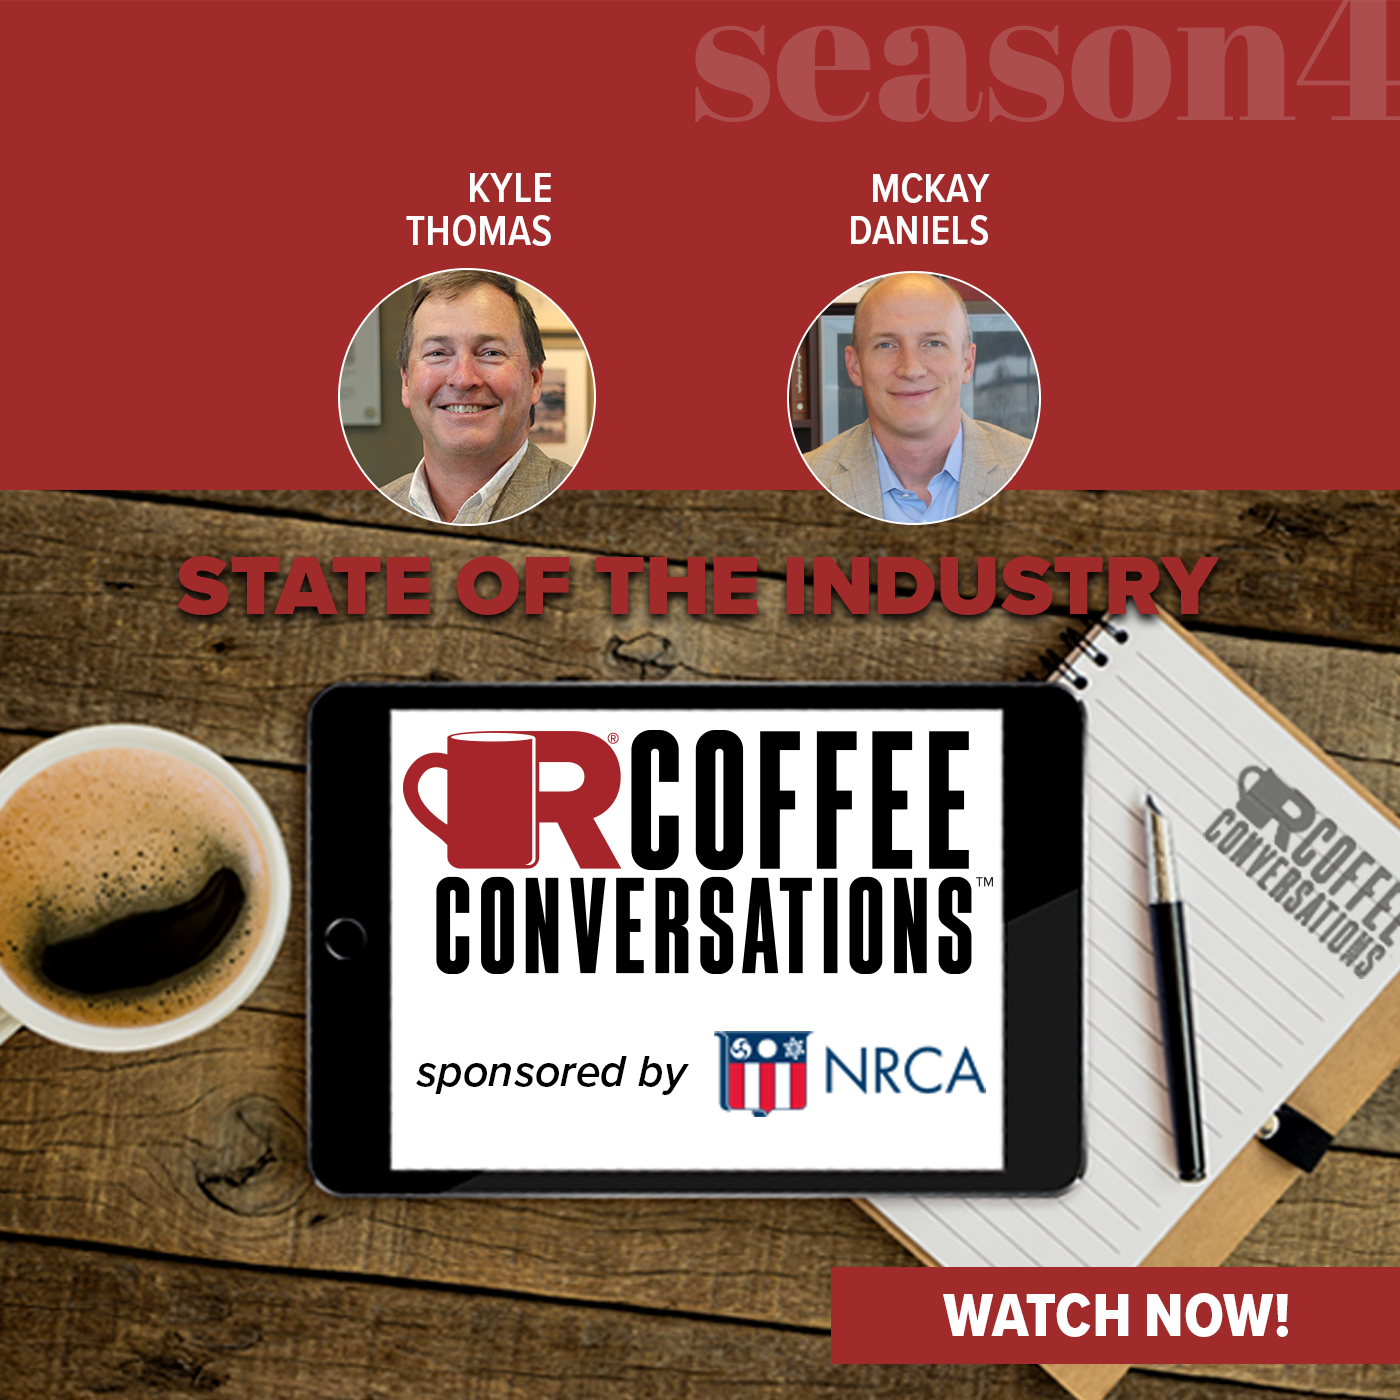 NRCA - Coffee Conversations - State of the Industry Sponsored By NRCA - POD